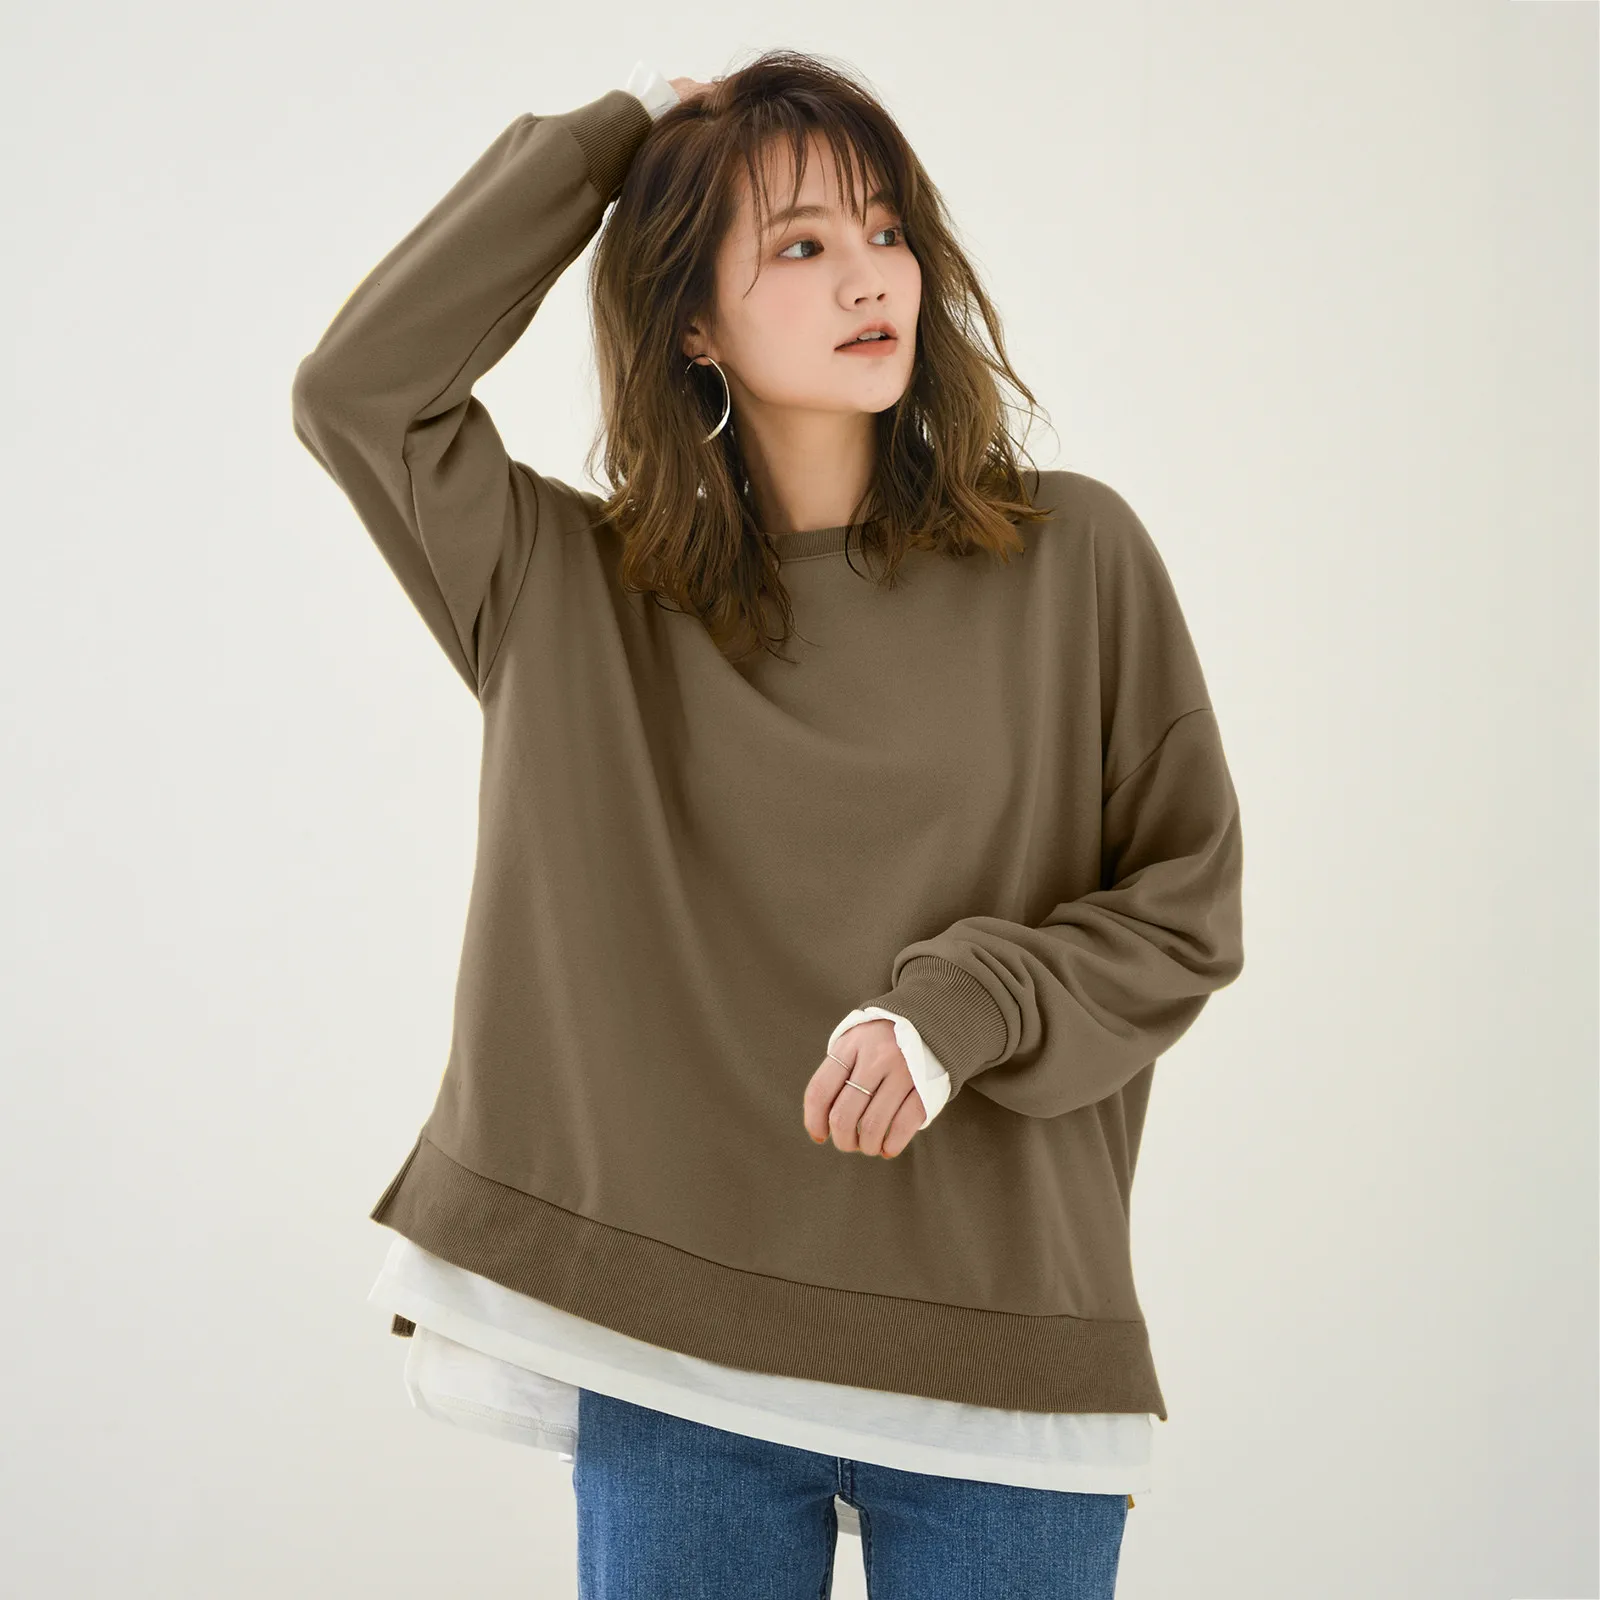 

Womens Casual Long Sleeves Sweatshirt Tops Crew Neck Lightweight Tunic Fall Pullovers Patterned Cropped Cardigans